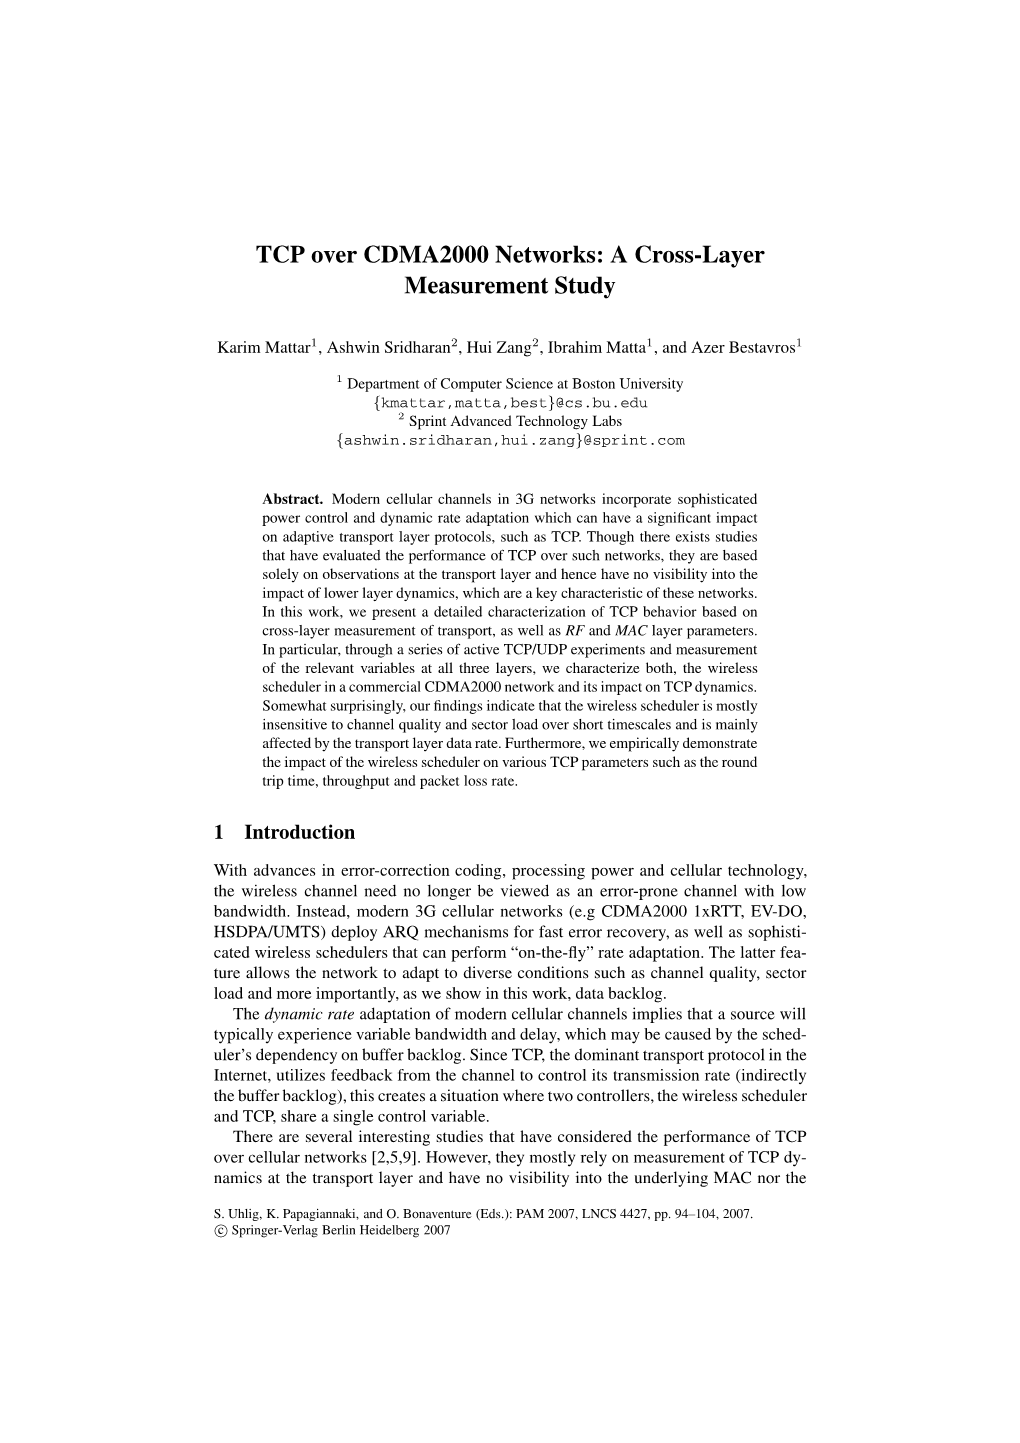 TCP Over CDMA2000 Networks: a Cross-Layer Measurement Study